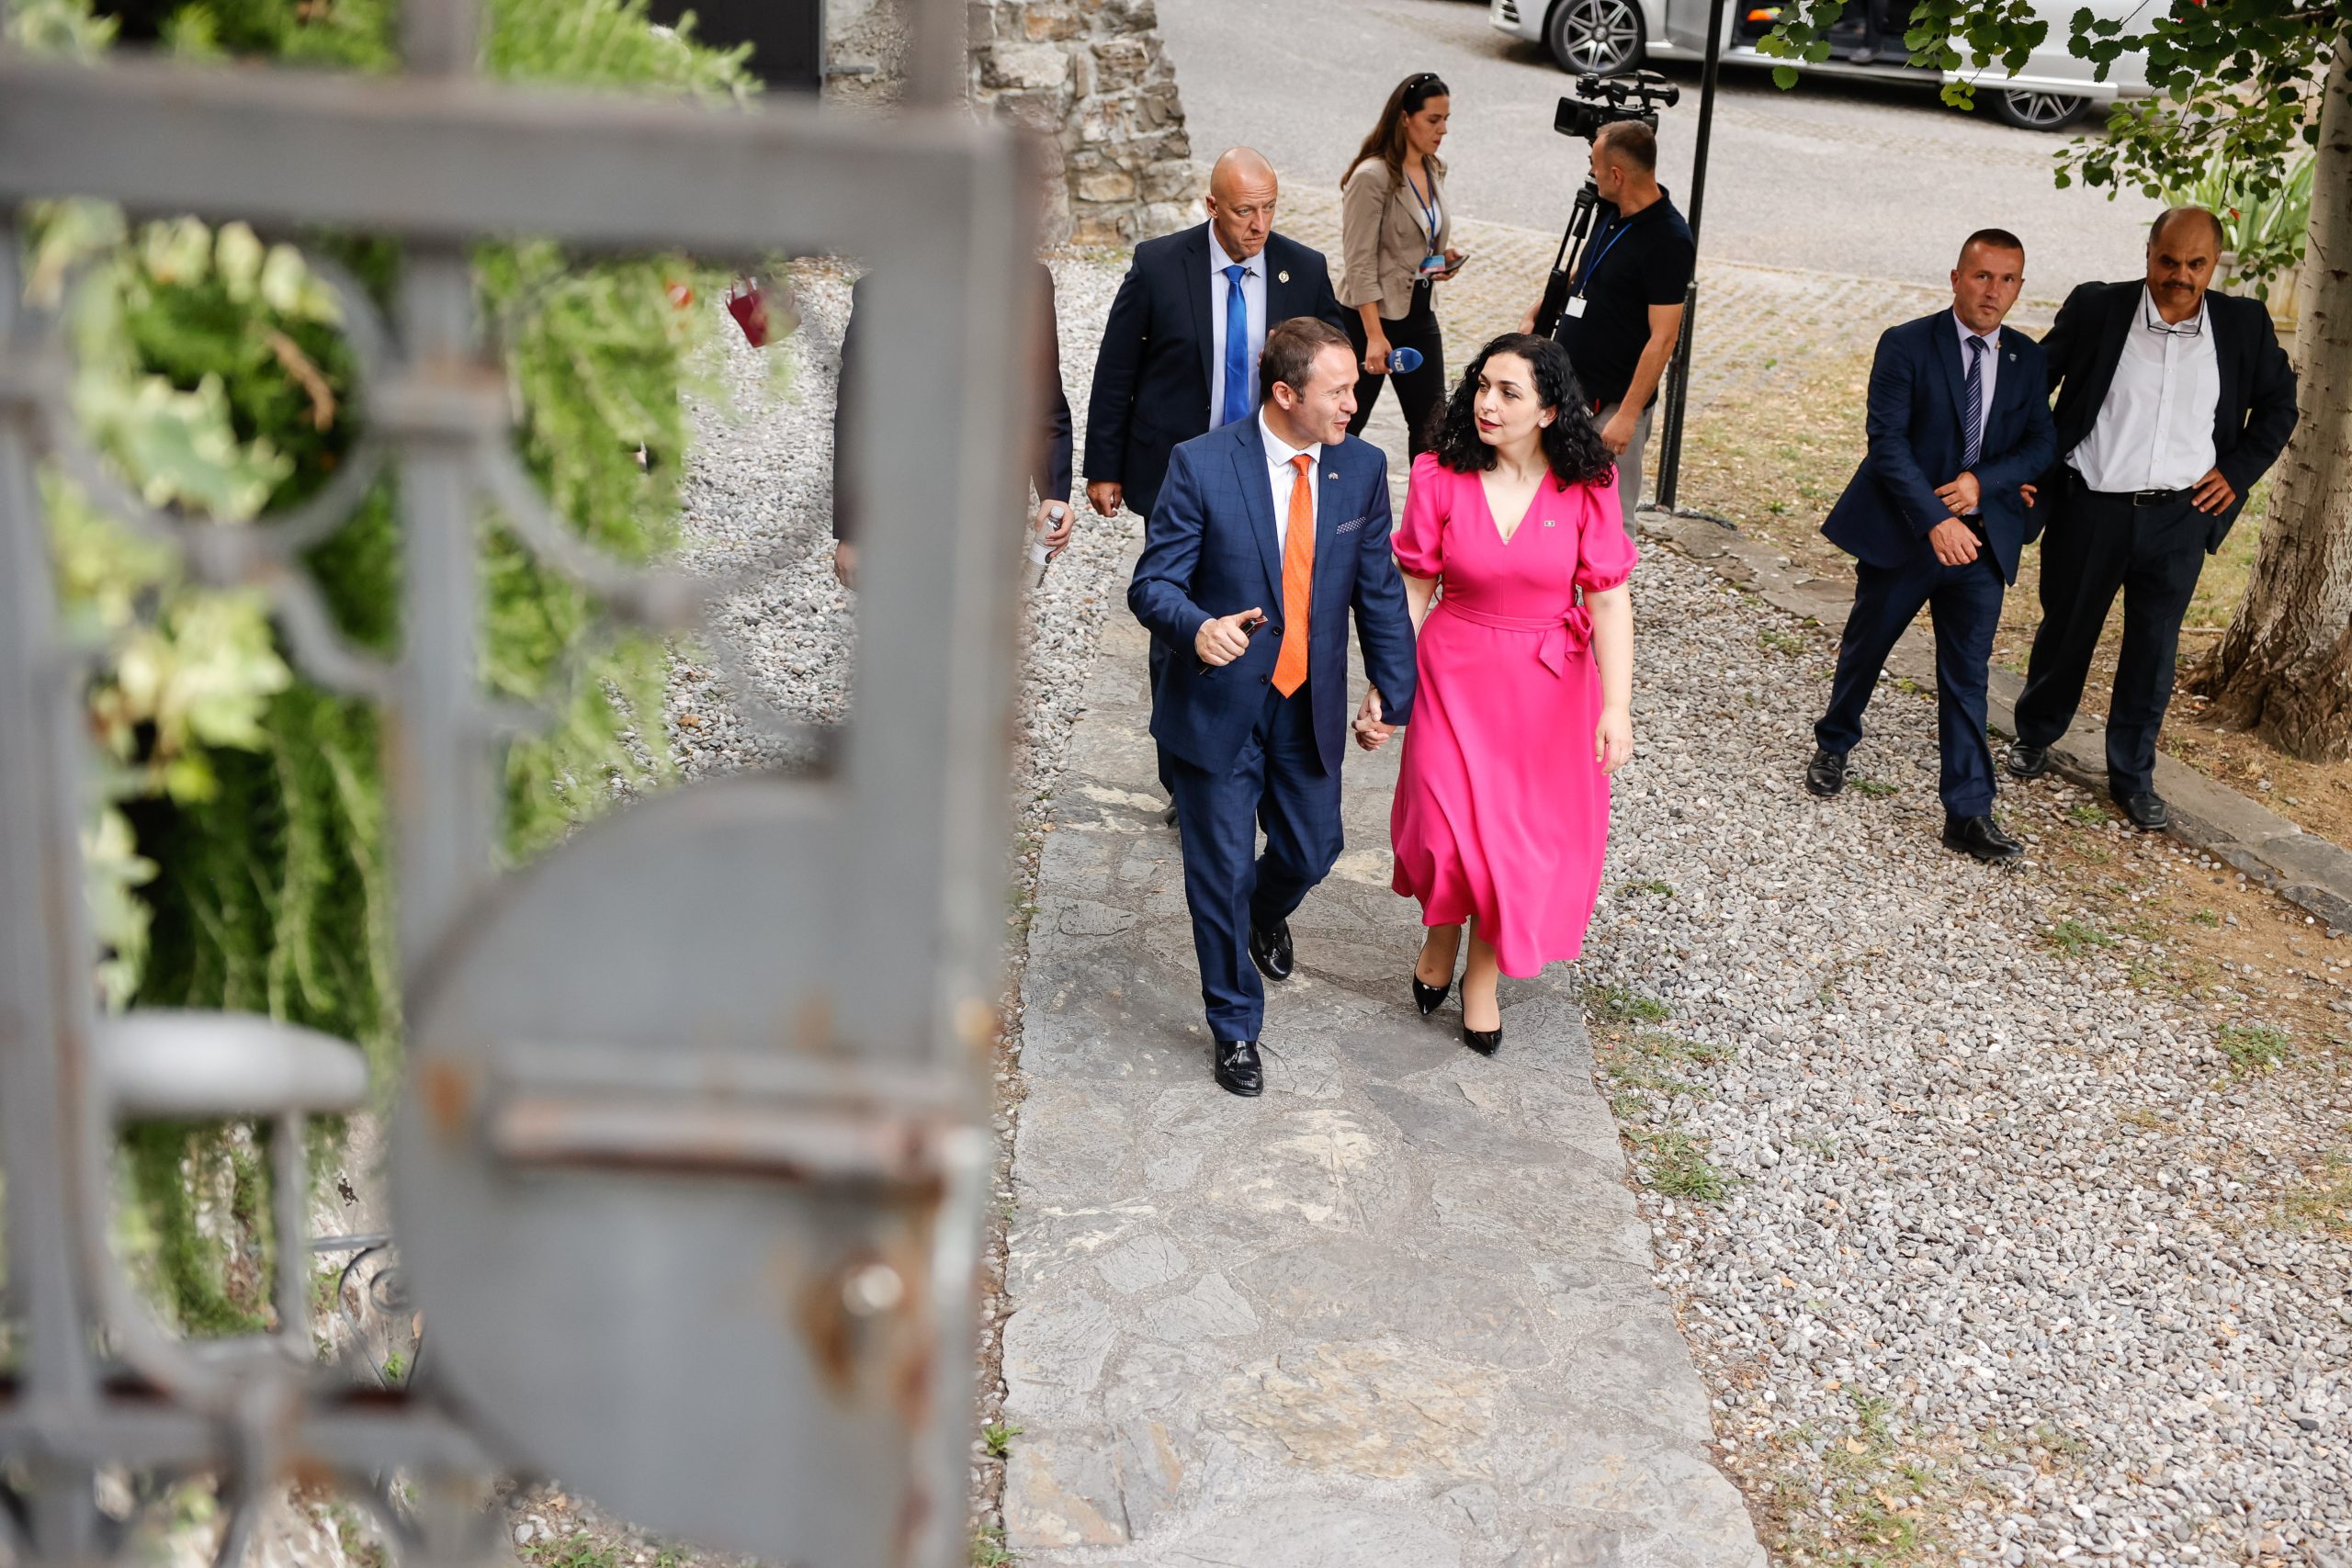 05_07_2022_5357458_Official_State_Visit_to_Slovenia20220704_40